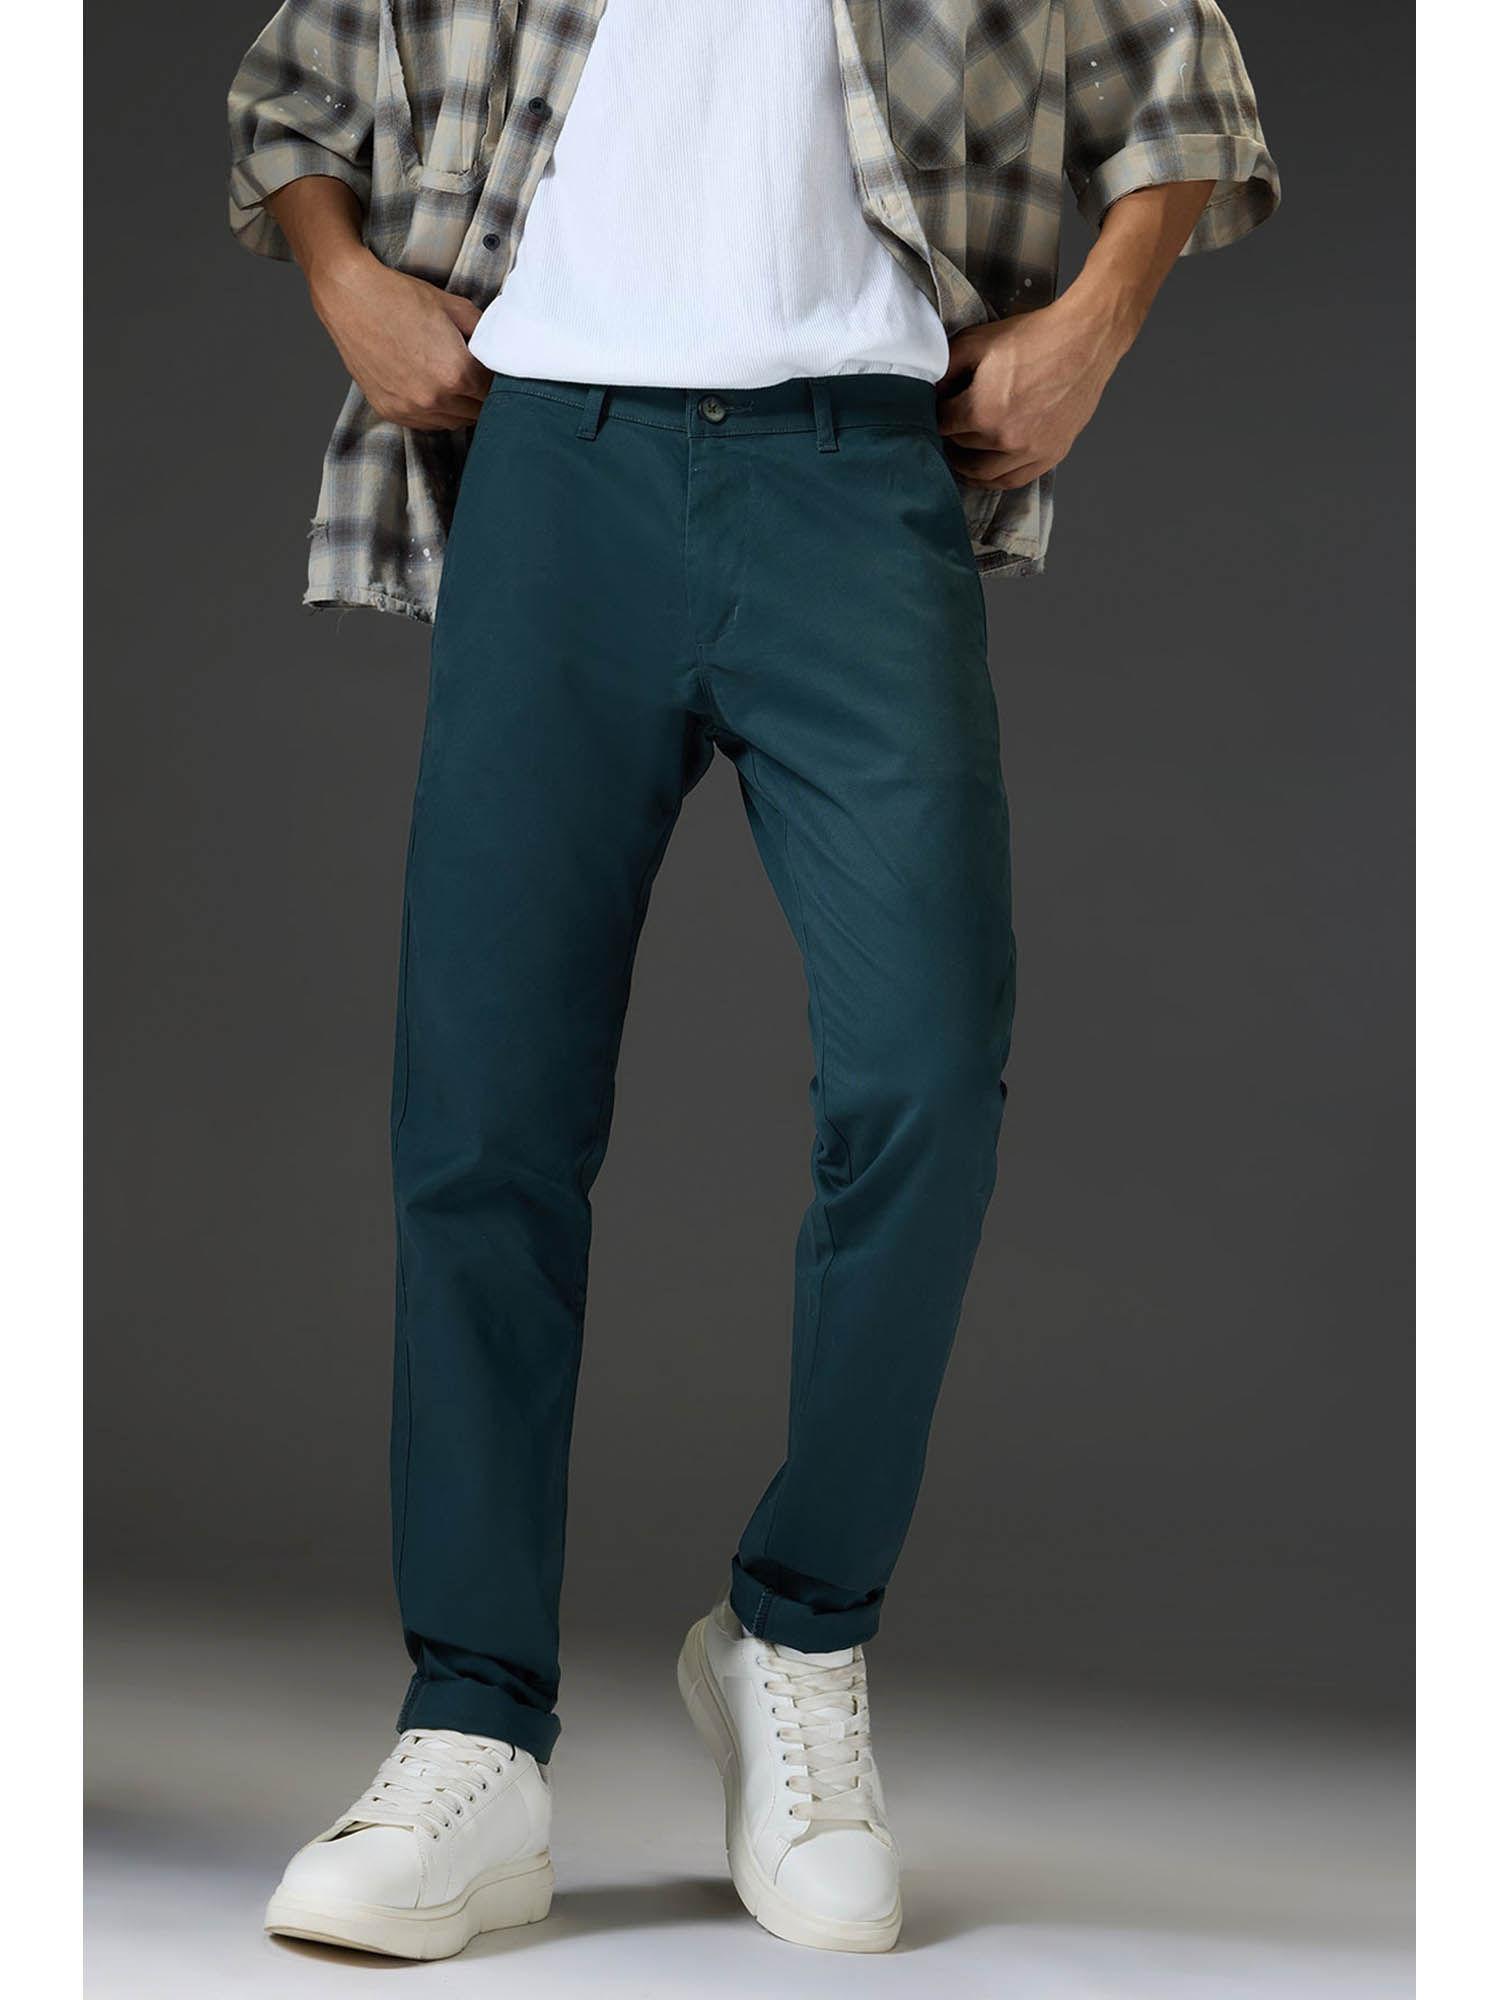 mens teal green stretchable trouser